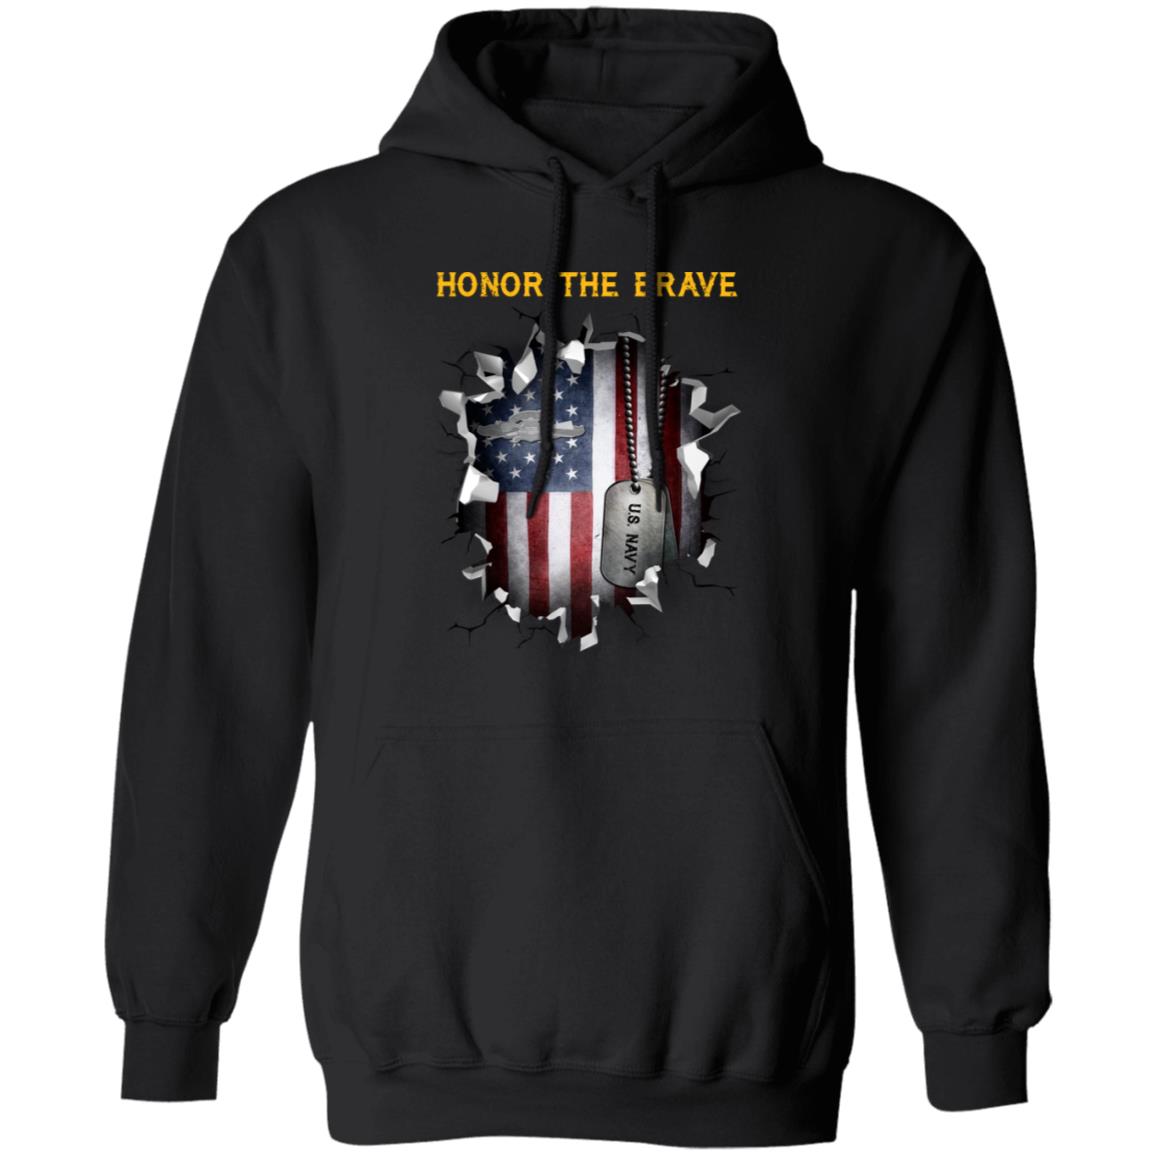 U.S. Navy Expeditionary Warfare Specialist (EXW) - Honor The Brave Front Shirt